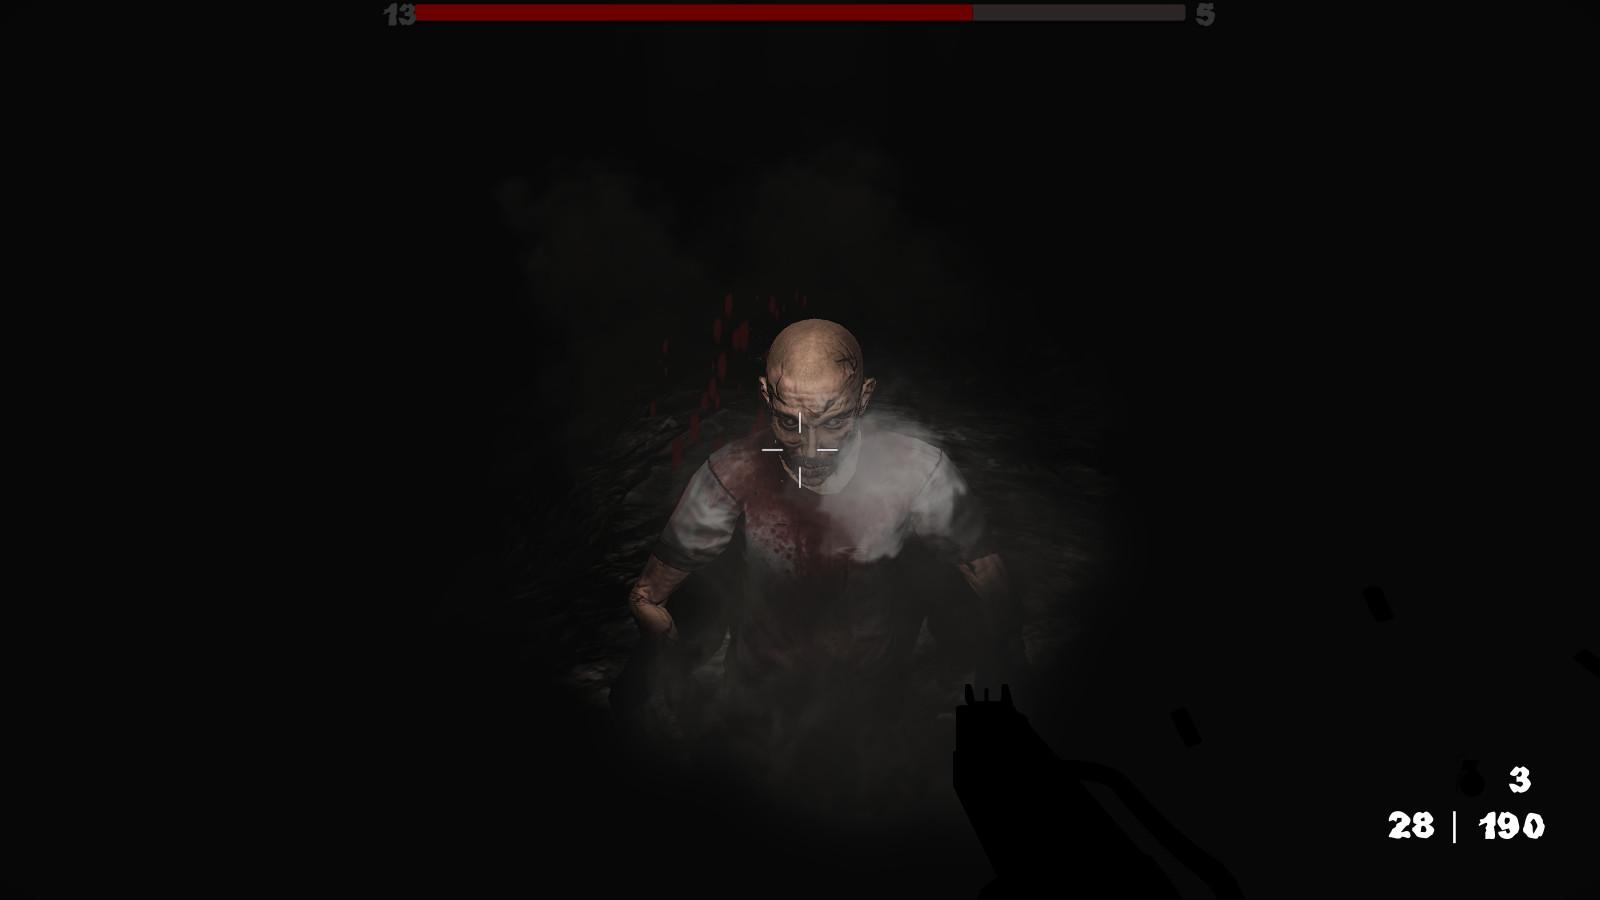 Screenshot №8 from game CONTRACTED